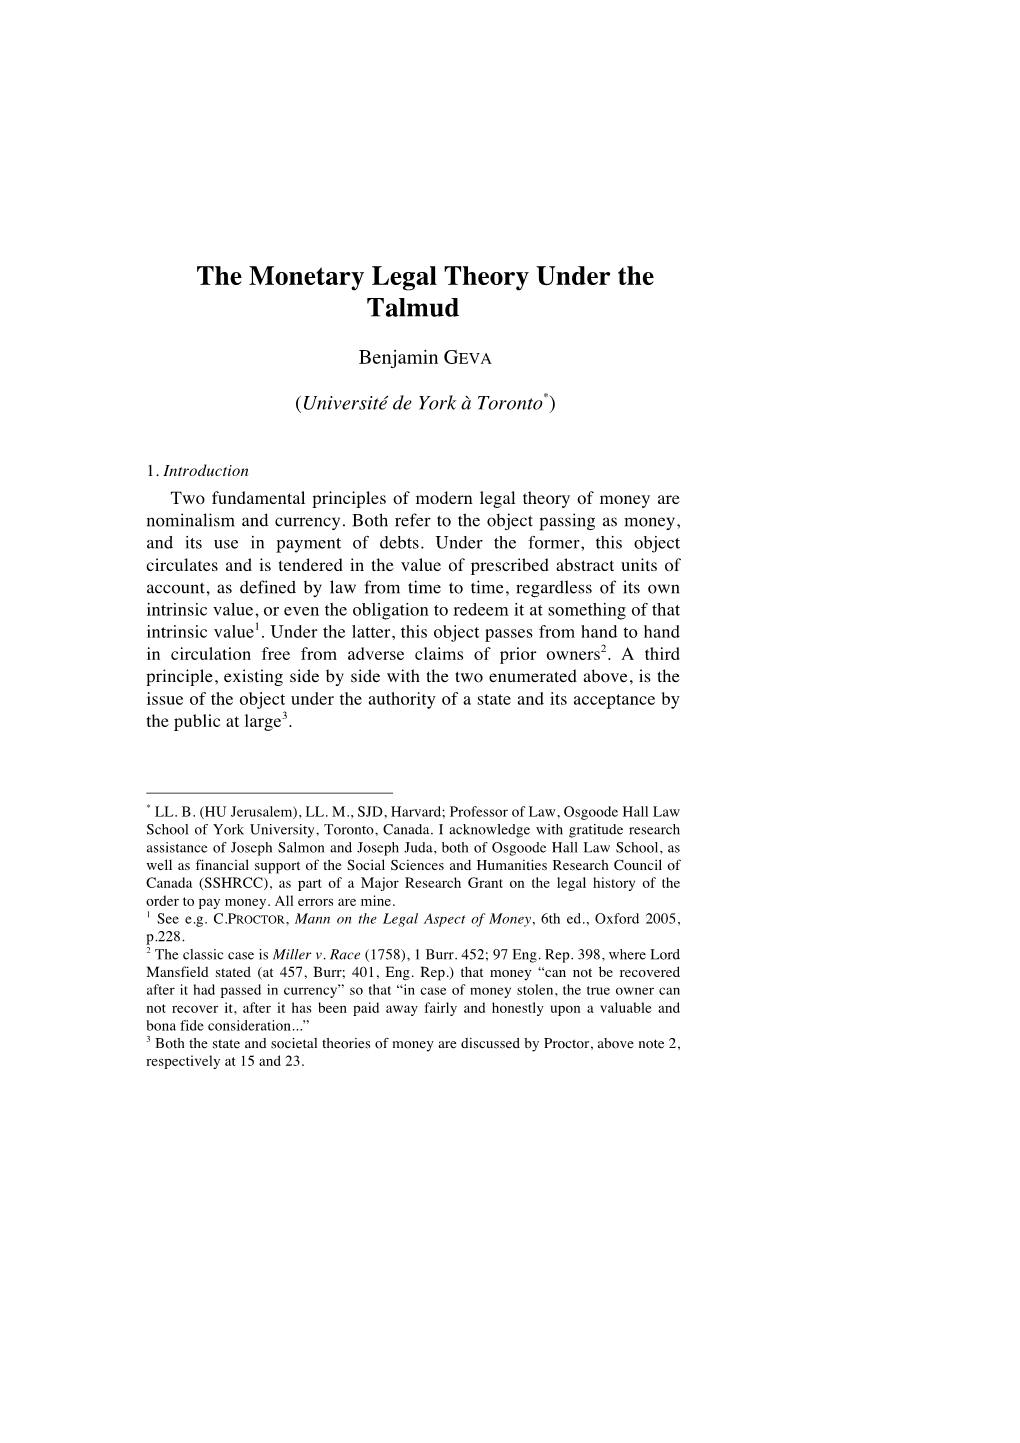 The Monetary Legal Theory Under the Talmud